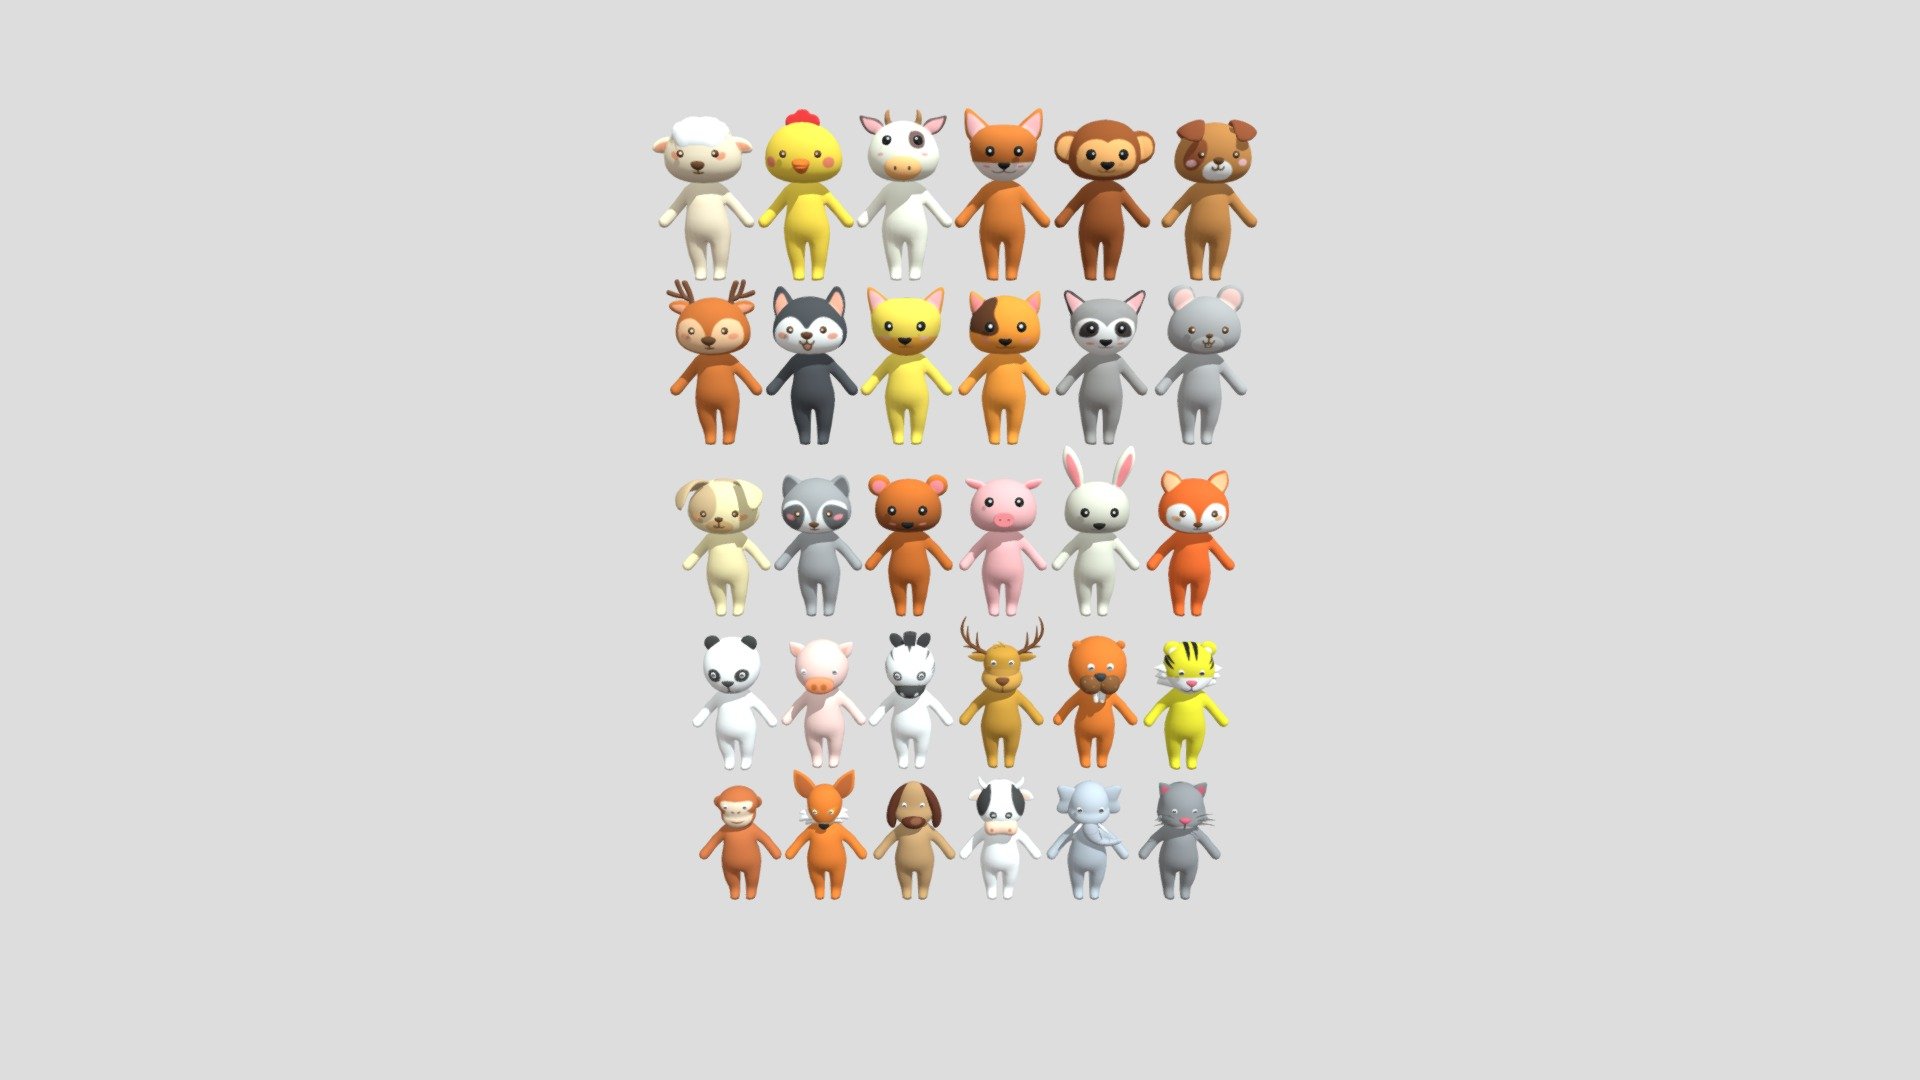 Collection with 30 character animals cartoon (Character002 Little Animal Pack).
This pack includes 30 animal face models. These product samples are very good for making games, ar, vr, web, cartoons, video rendering....

Format :

Blender (3.5)
Maya 2019 (.ma)
Dae
Glb
Fbx
Usdc
Abc
Obj
Clean topology:
No Rig.
Texture : 2048 x 2048 (Basecolor, Normal).
UV does not overlap.
Quadrilateral Grid.
Vertices: 102042
Polygon: 105132
List of animals :
Bear
Dog
Cat
Chicken
Cow
Elephant
Fox
Horse
Monkey
Panda
Pig
Rabbit
Deer
Wolf
Horse
Ratel
Sea Lion
Sheep
Tiger
Mouse (rat)
&hellip;
I have exported from the model to many supported file formats. Please leave positive feedback if you like this product. Thank you! - Character002 Little Animal Pack - 3D model by MayaZ (@linhleend) 3d model